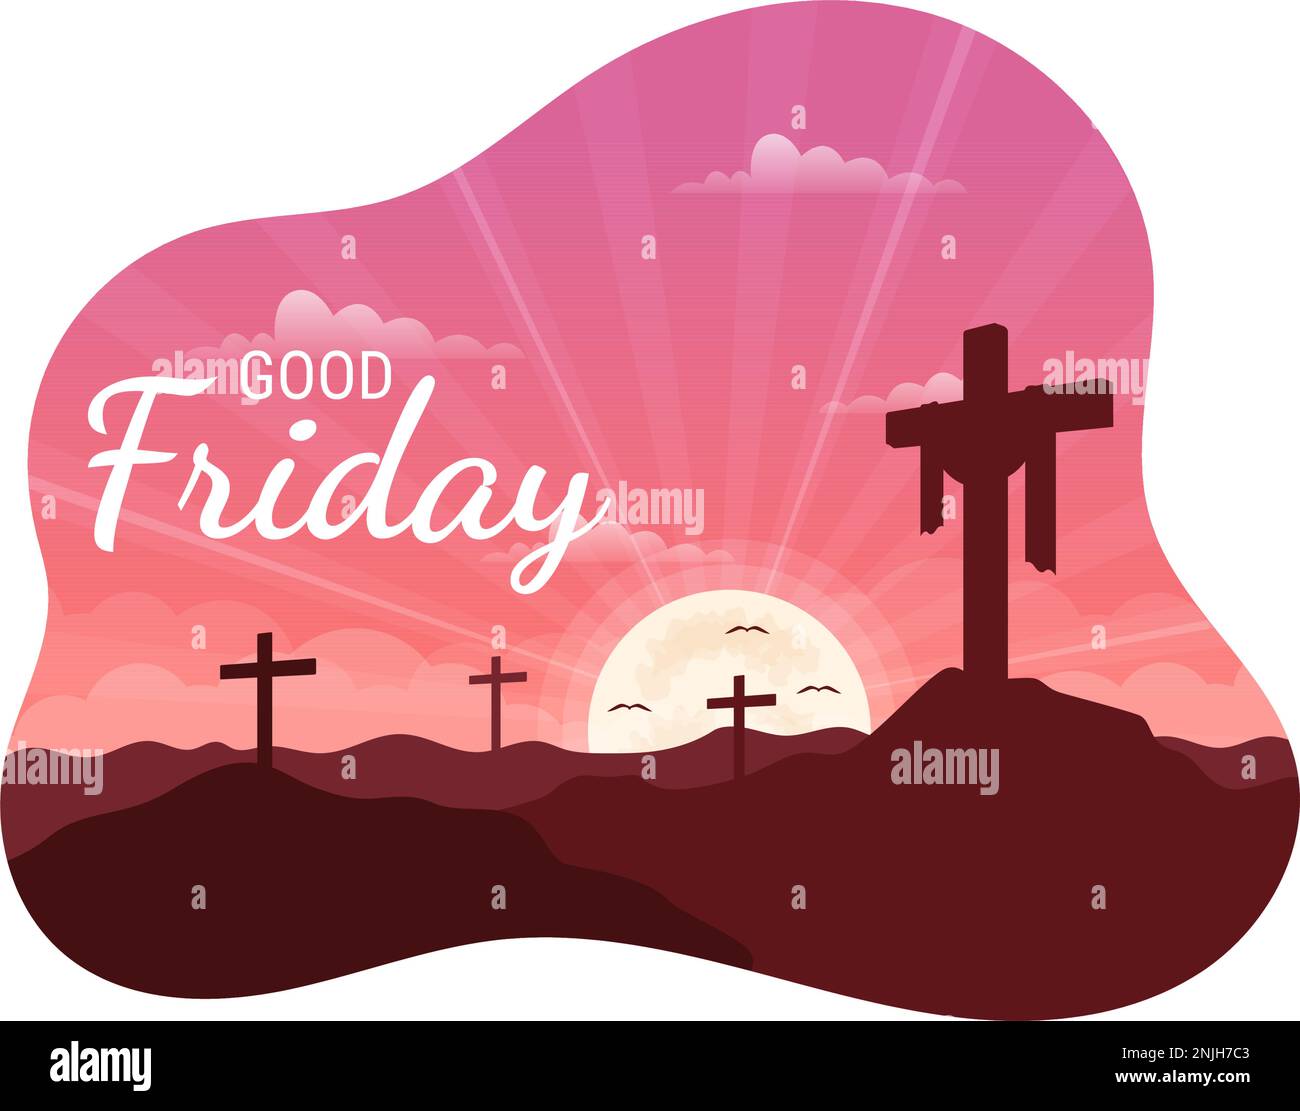 Happy Karfreitag Illustration with Christian Holiday of Jesus Christus Crucifixion in Flat Cartoon Hand Drawn for Web Banner or Landing Page Templates Stock Vektor